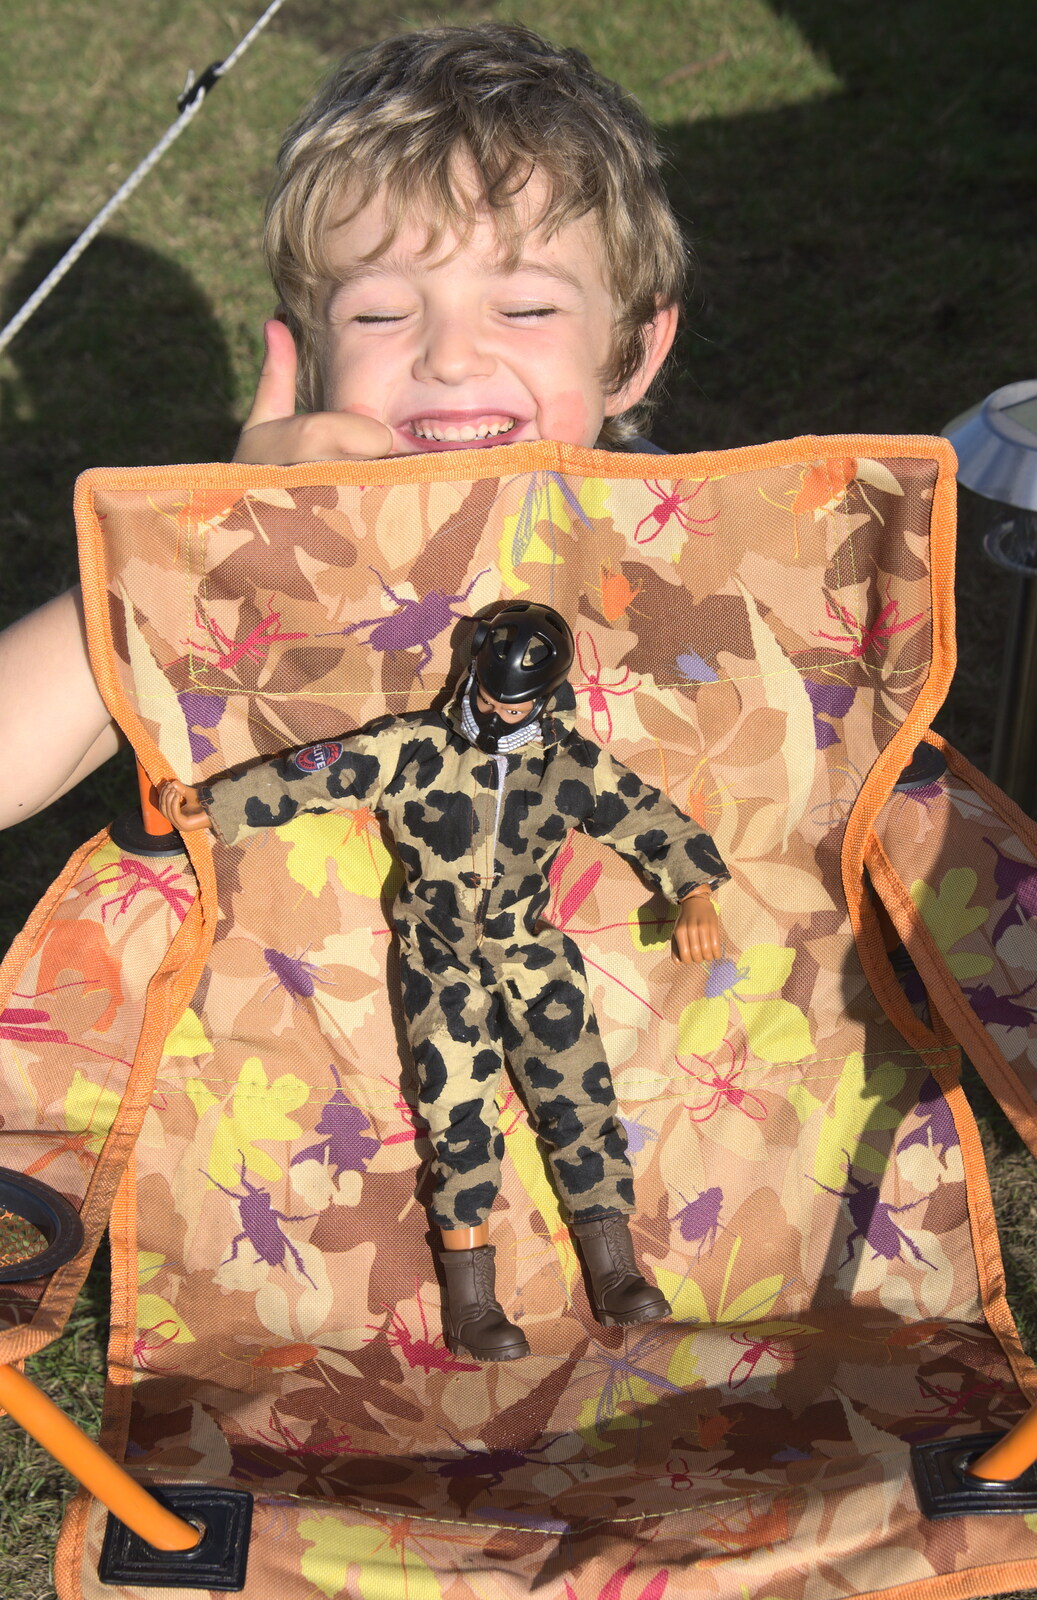 Fred shows off his new Action Man from Camping at Roundhills, Brockenhurst, New Forest, Hampshire - 29th August 2015